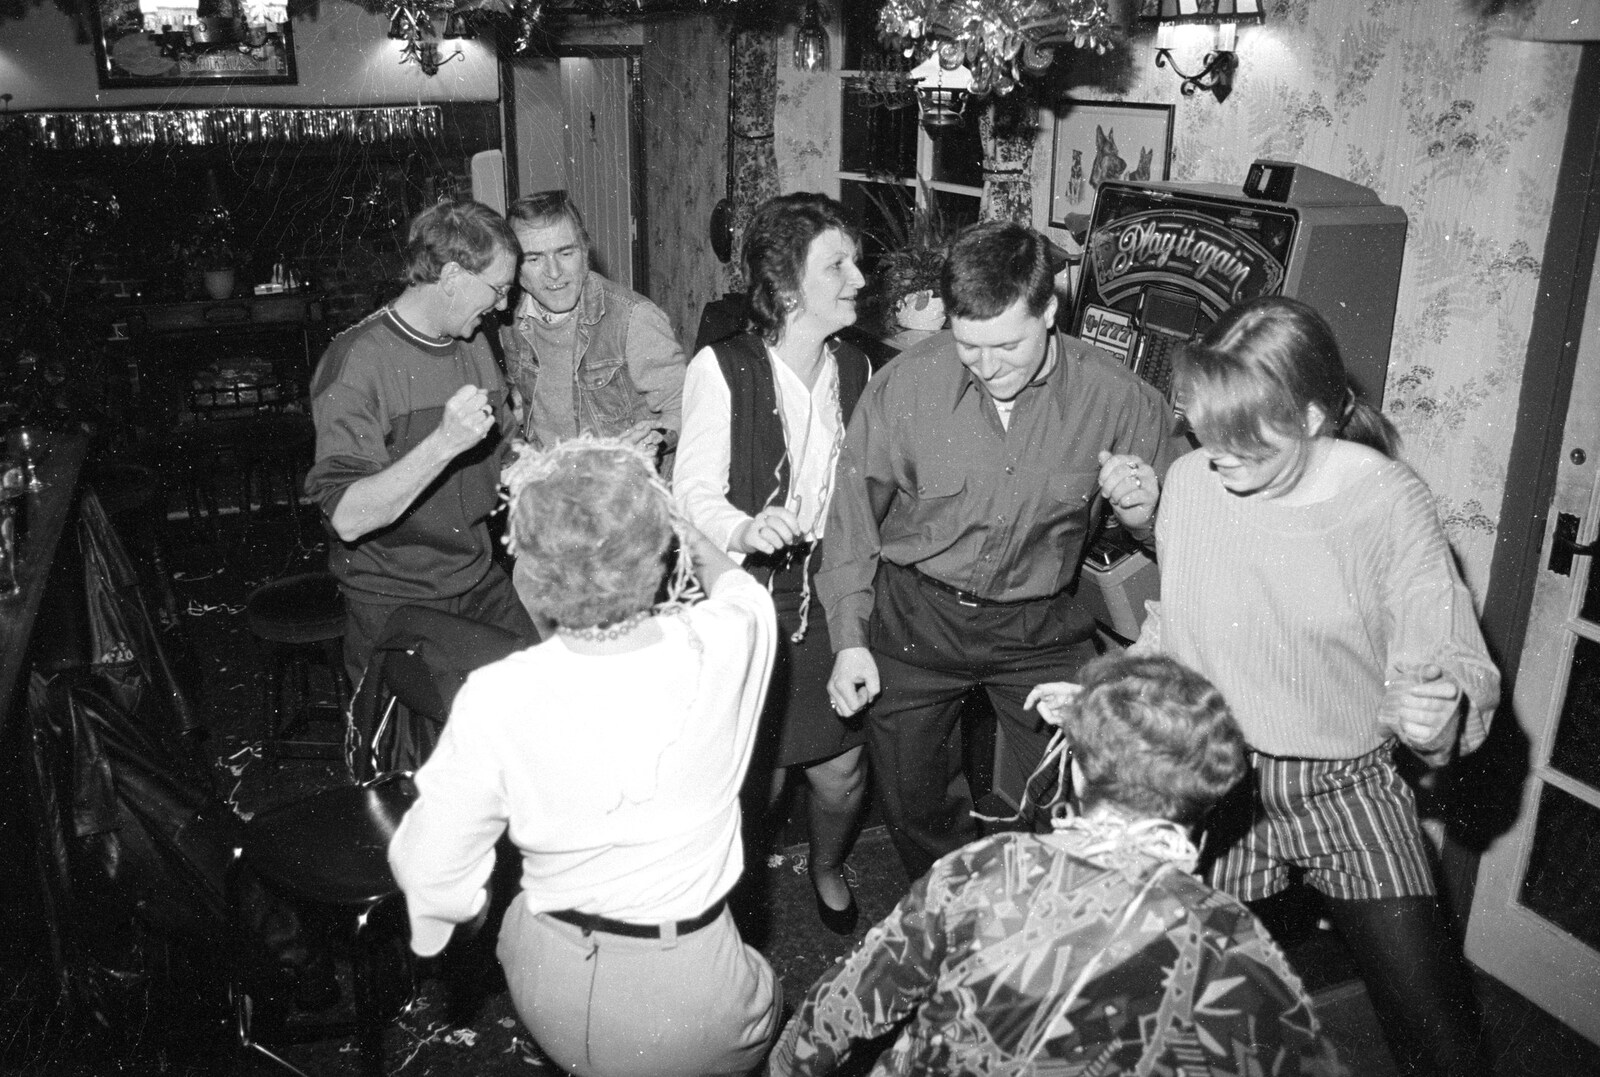 Some sort of dancing breaks out from New Year's Eve at the Swan Inn, Brome, Suffolk - 31st December 1992